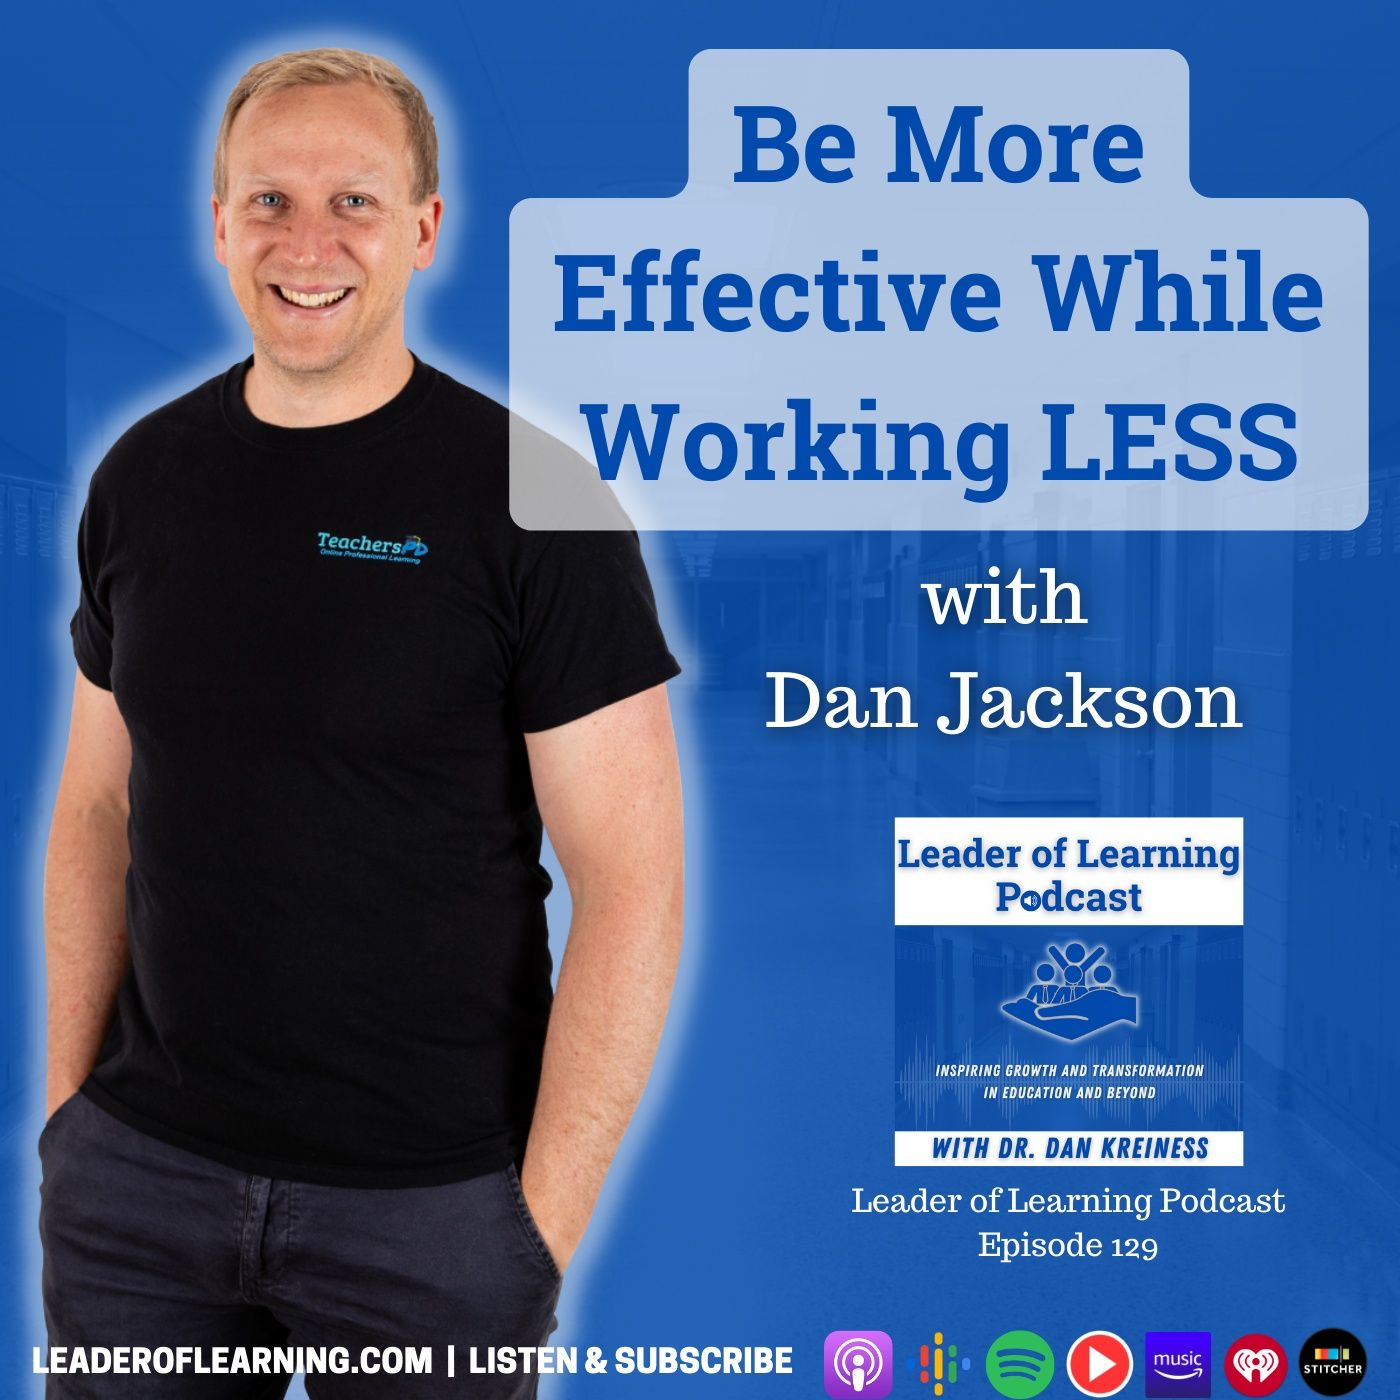 Be More Effective While Working Less with Dan Jackson Image